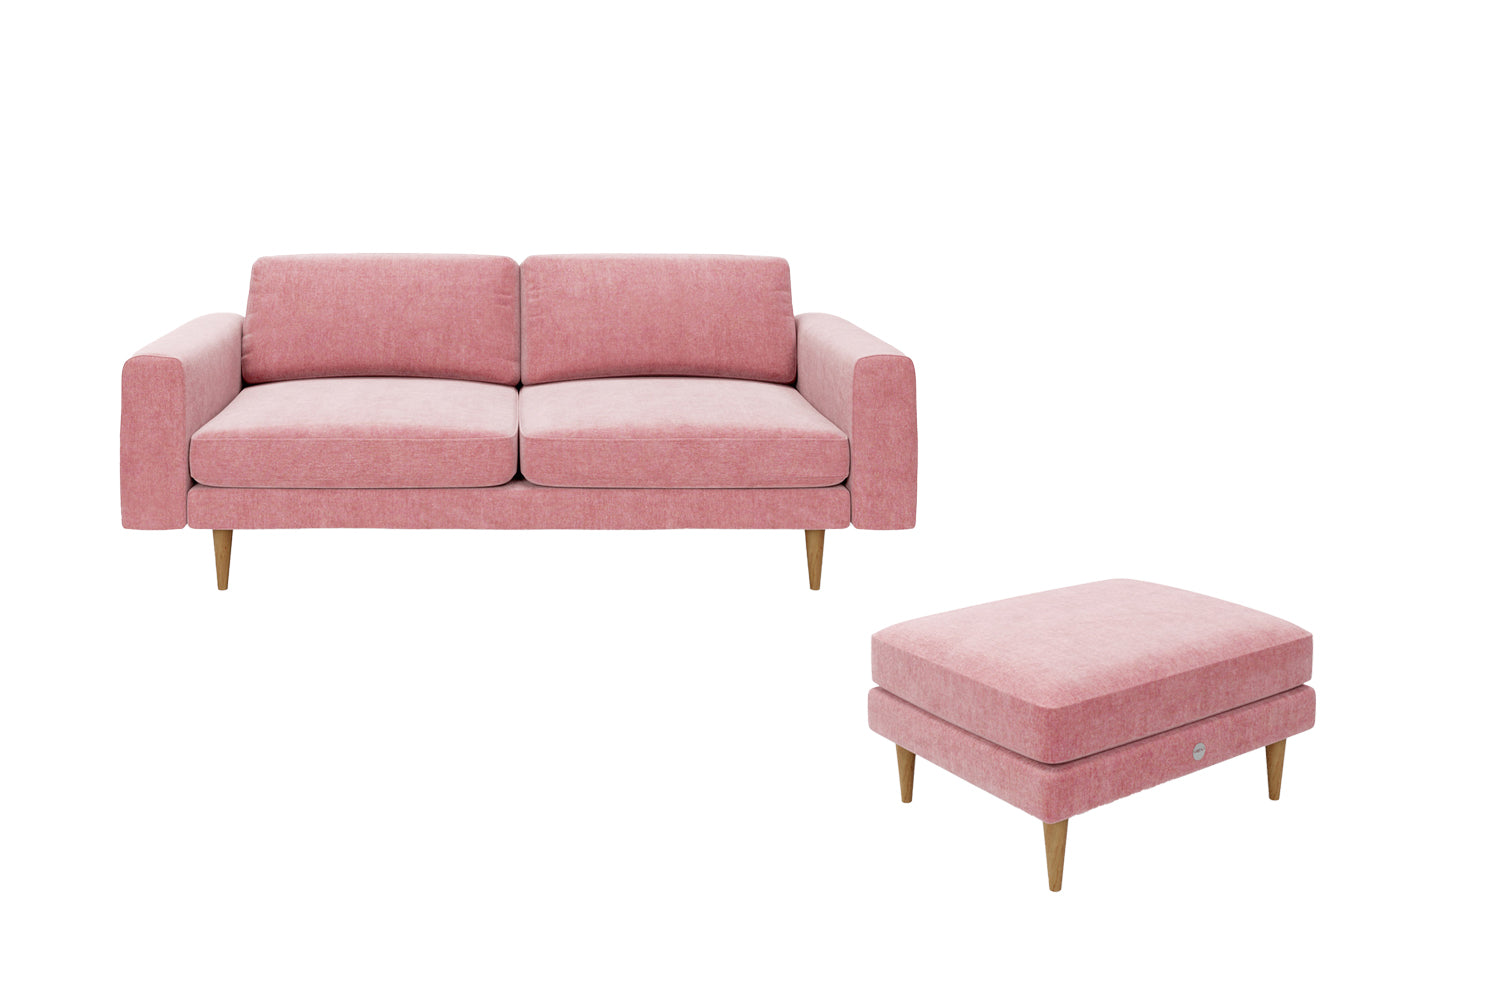 The Big Chill - 3 Seater Sofa and Footstool Set - Blush Coral